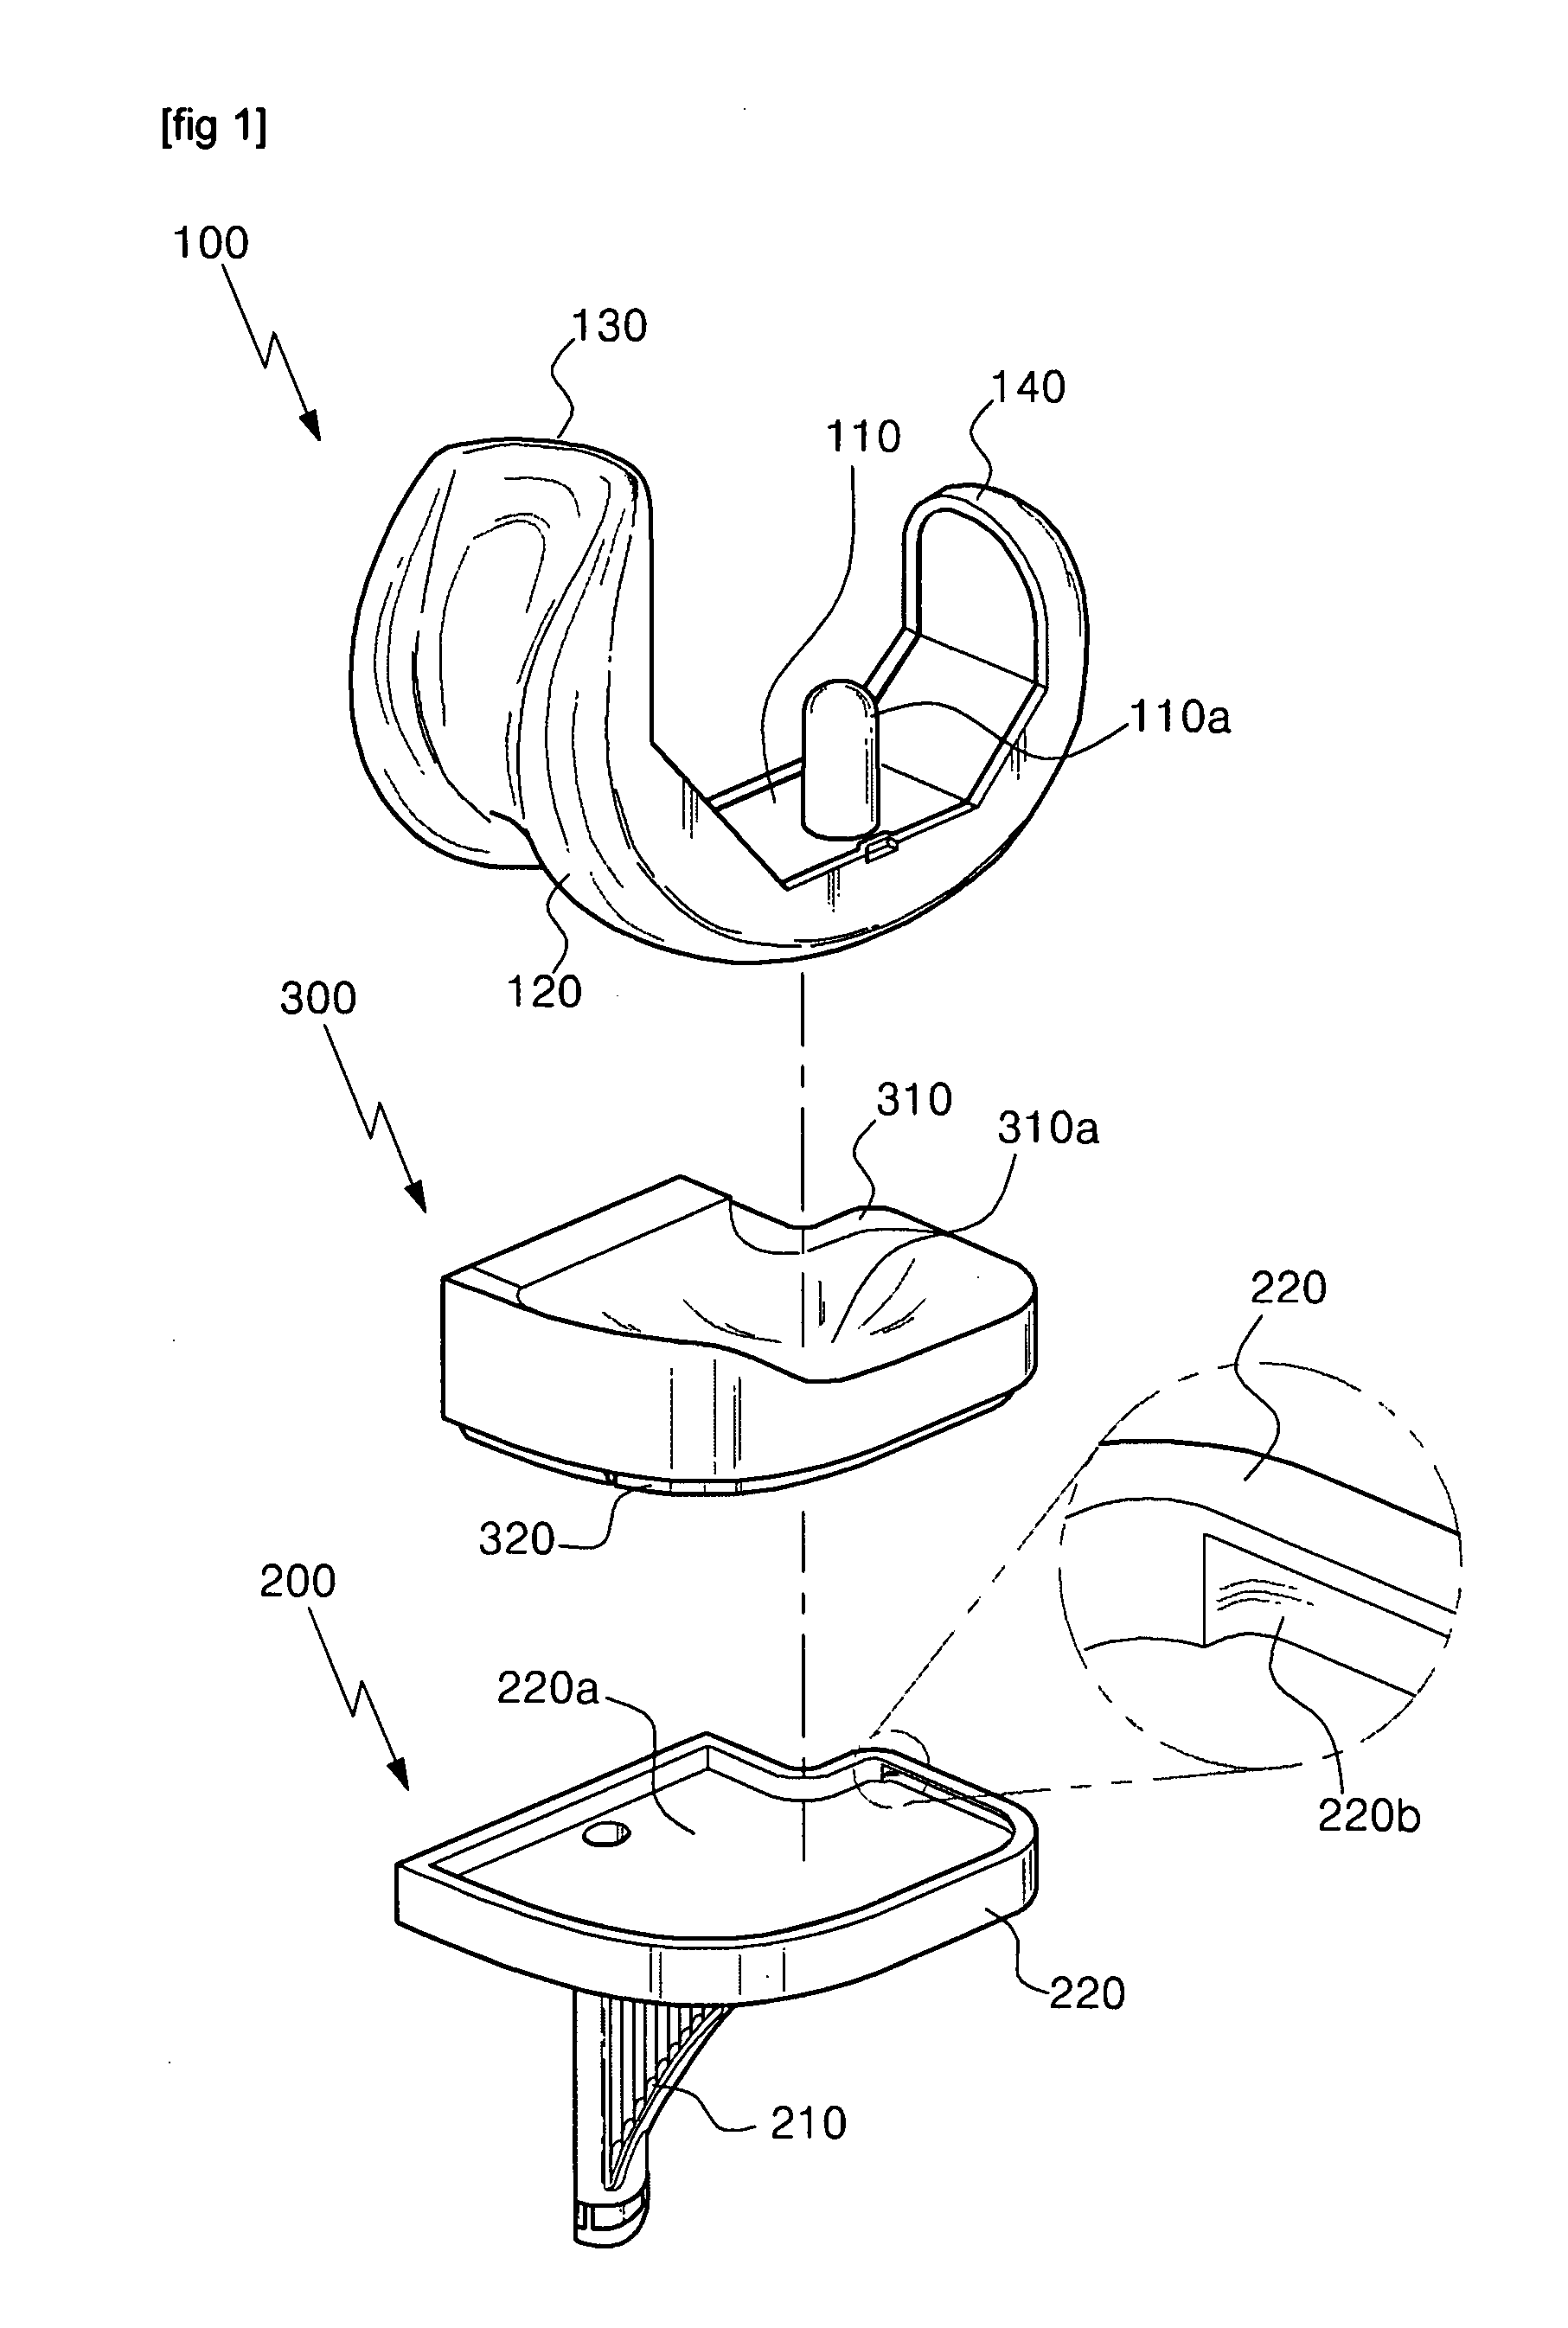 Knee joint prosthesis for bi-compartmental knee replacement and surgical devices thereof